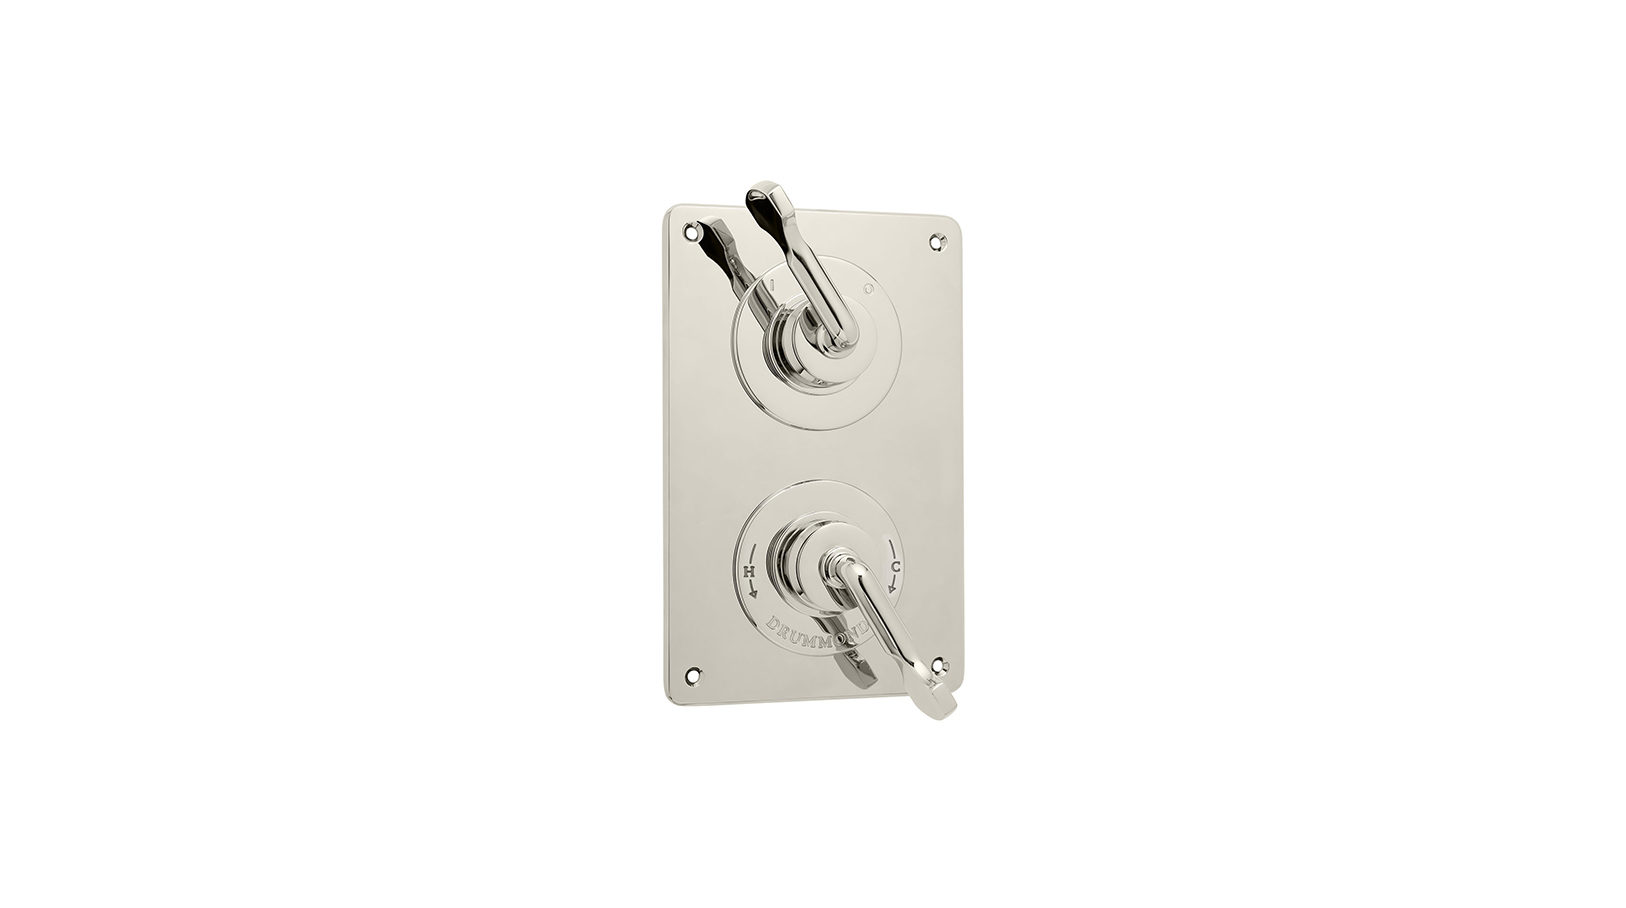 The Leawood Shower Plate Thermo & On/Off